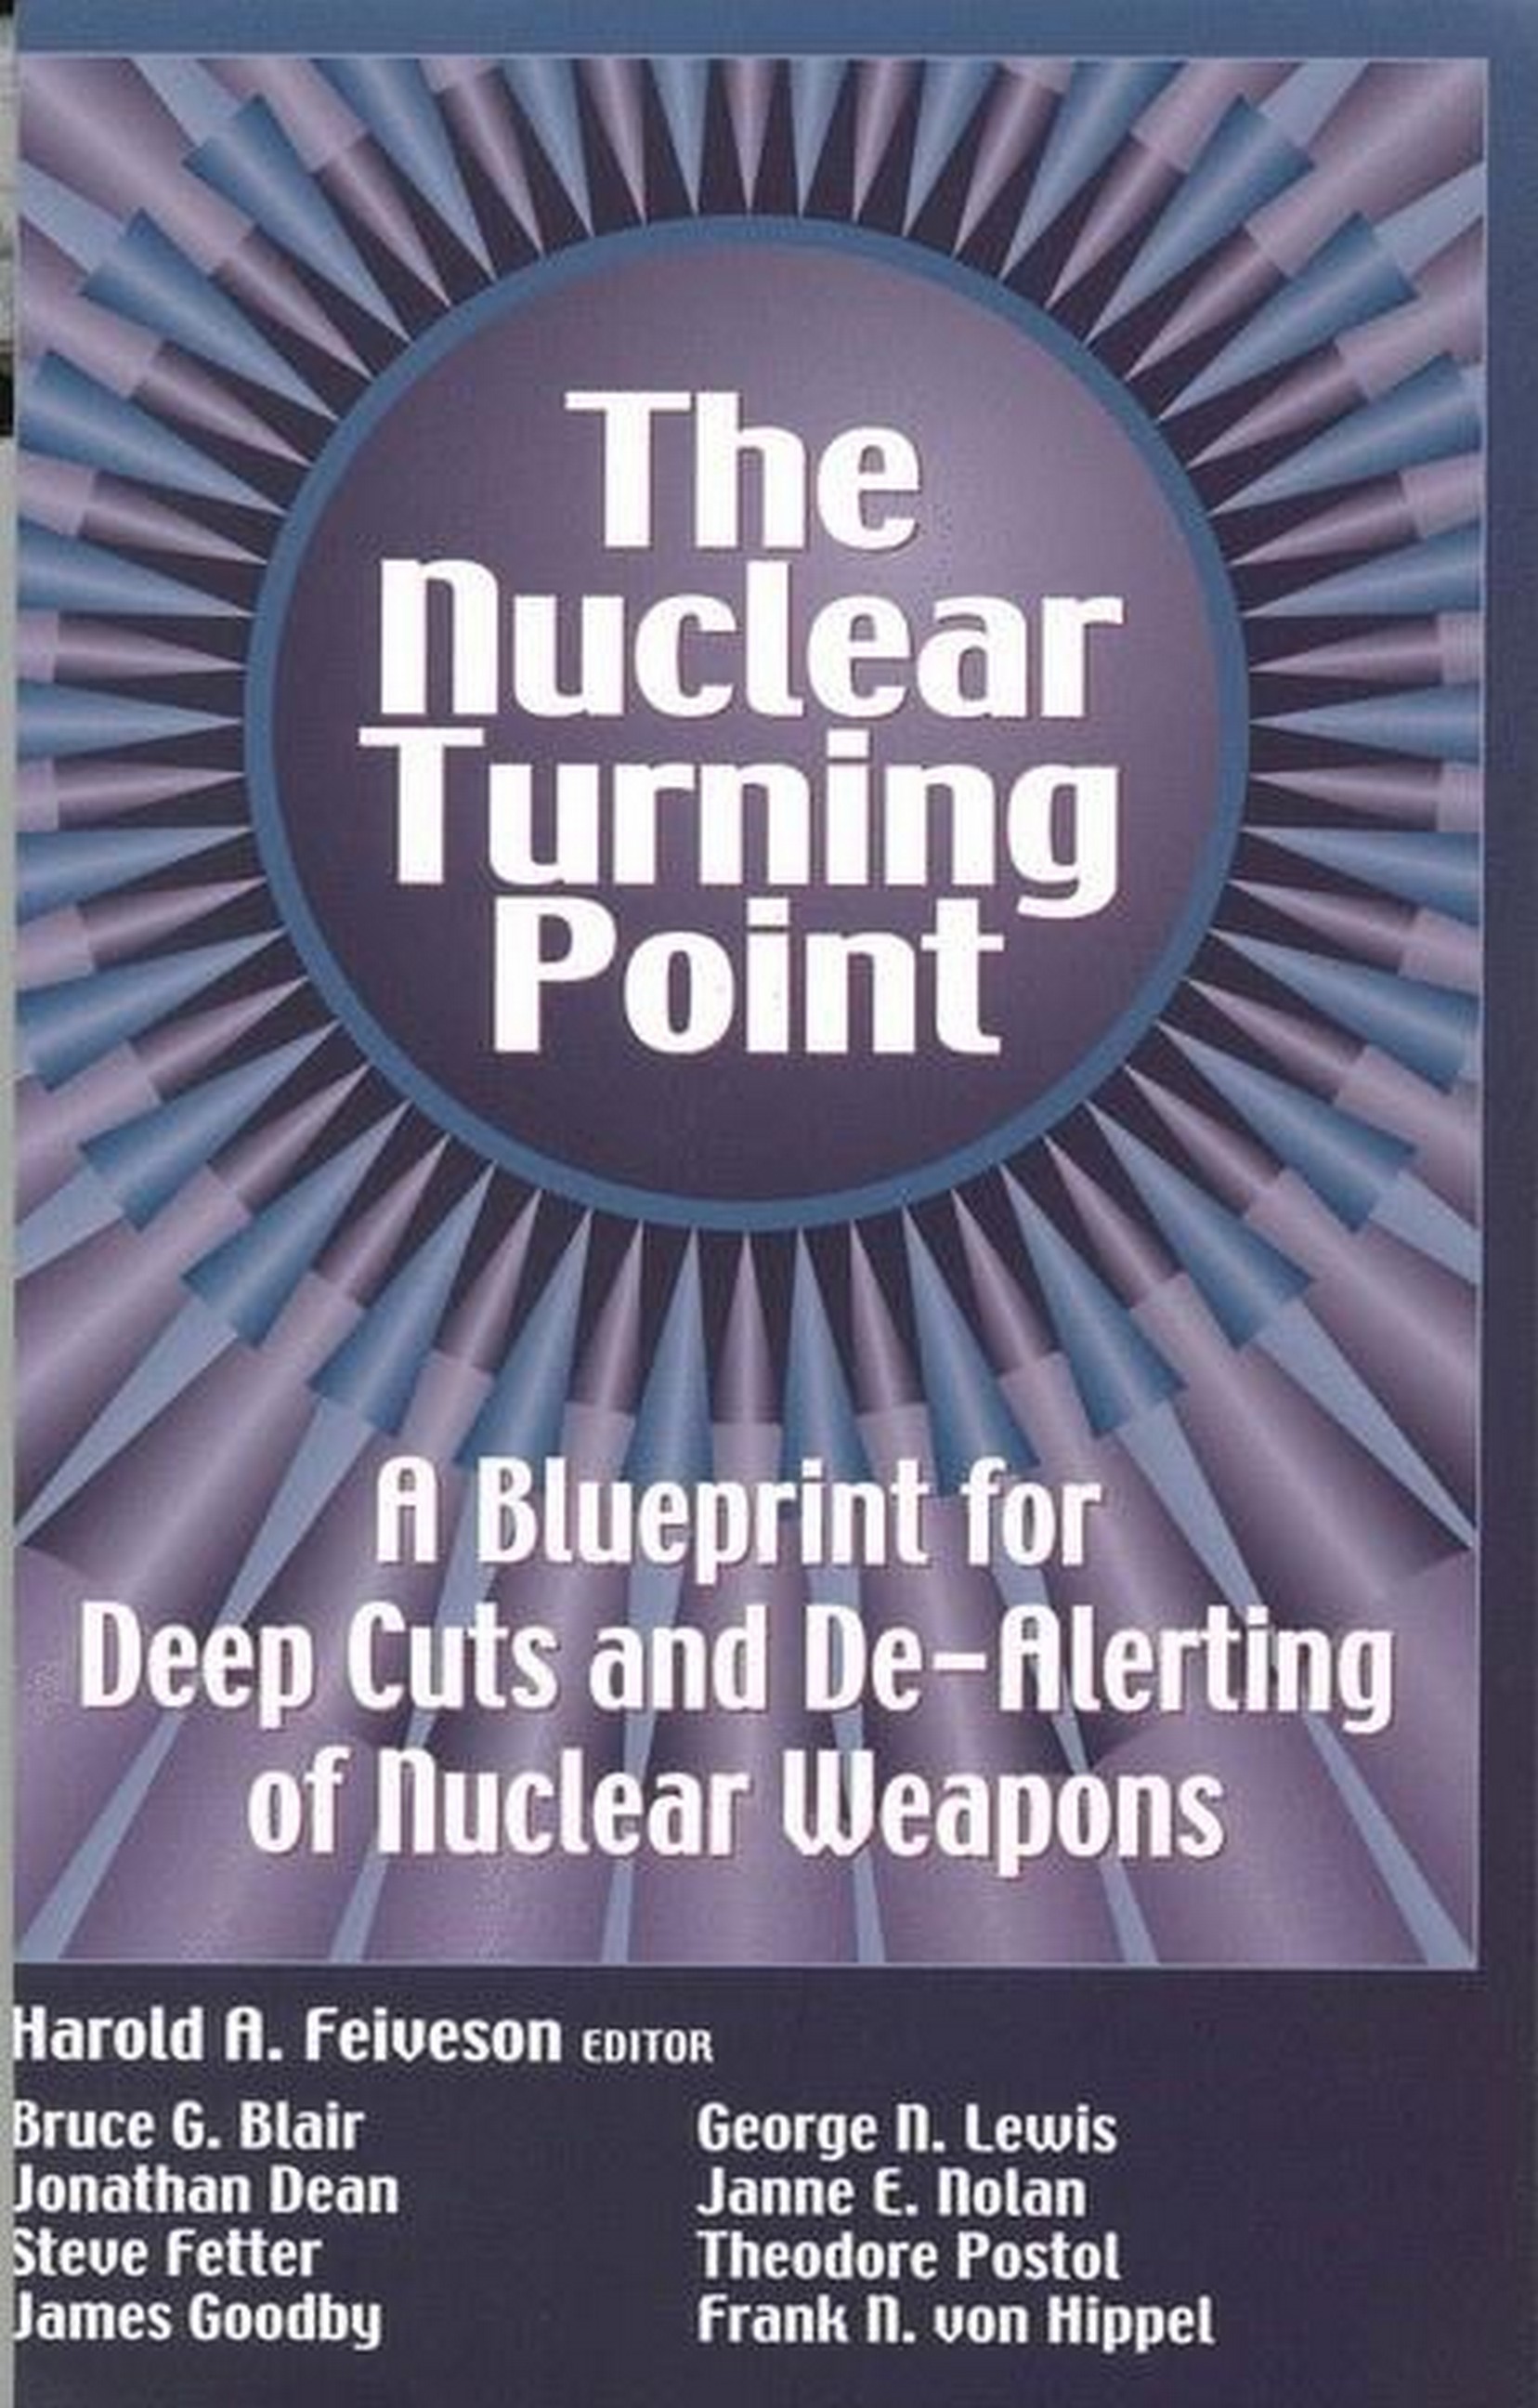 The Nuclear Turning Point: A Blueprint for Deep Cuts and De-Alerting of Nuclear Weapons